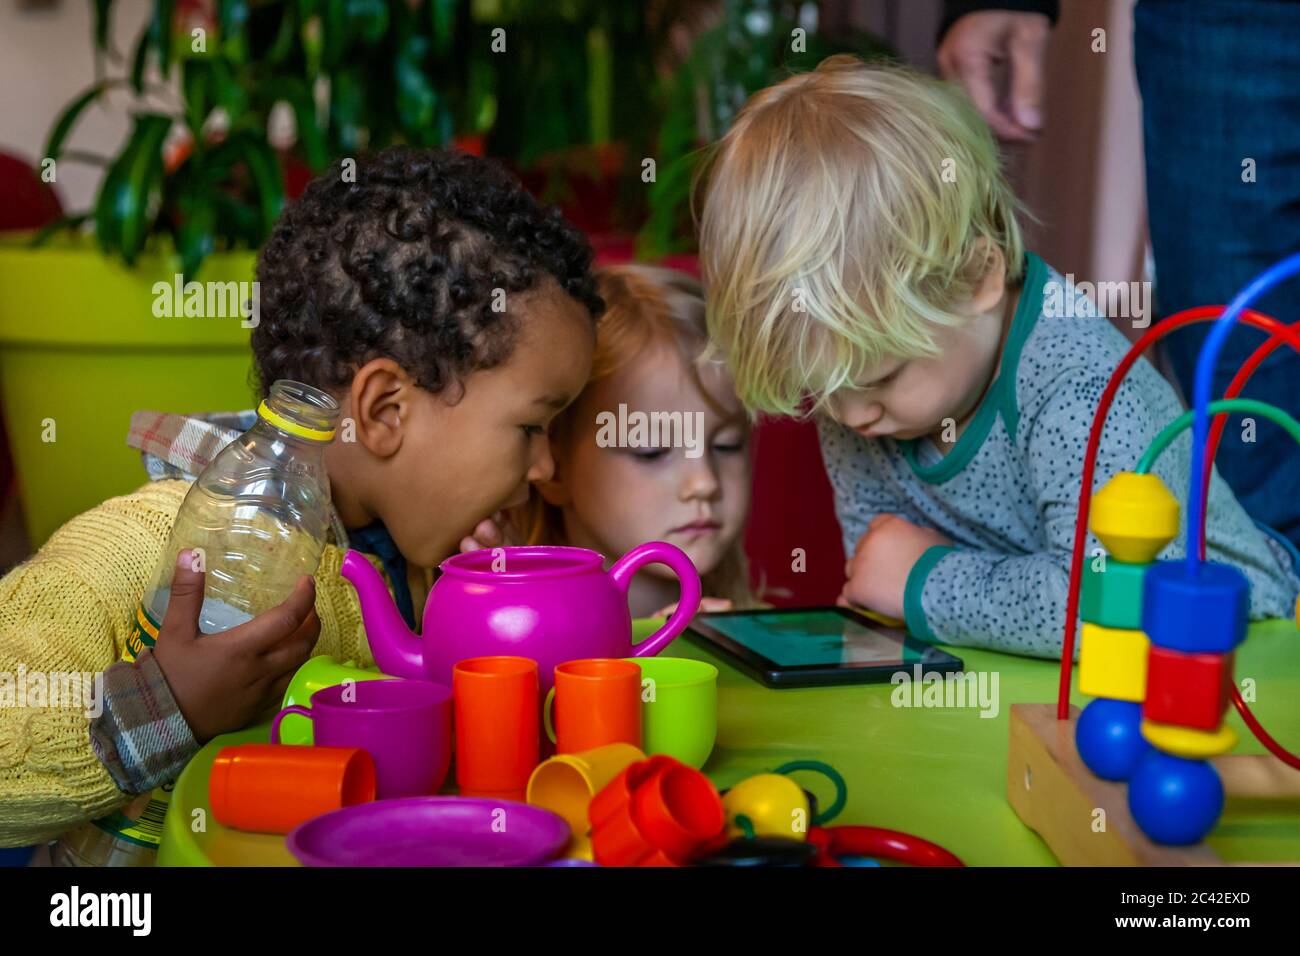 In a play corner, three small children focus on a smartphone Stock Photo